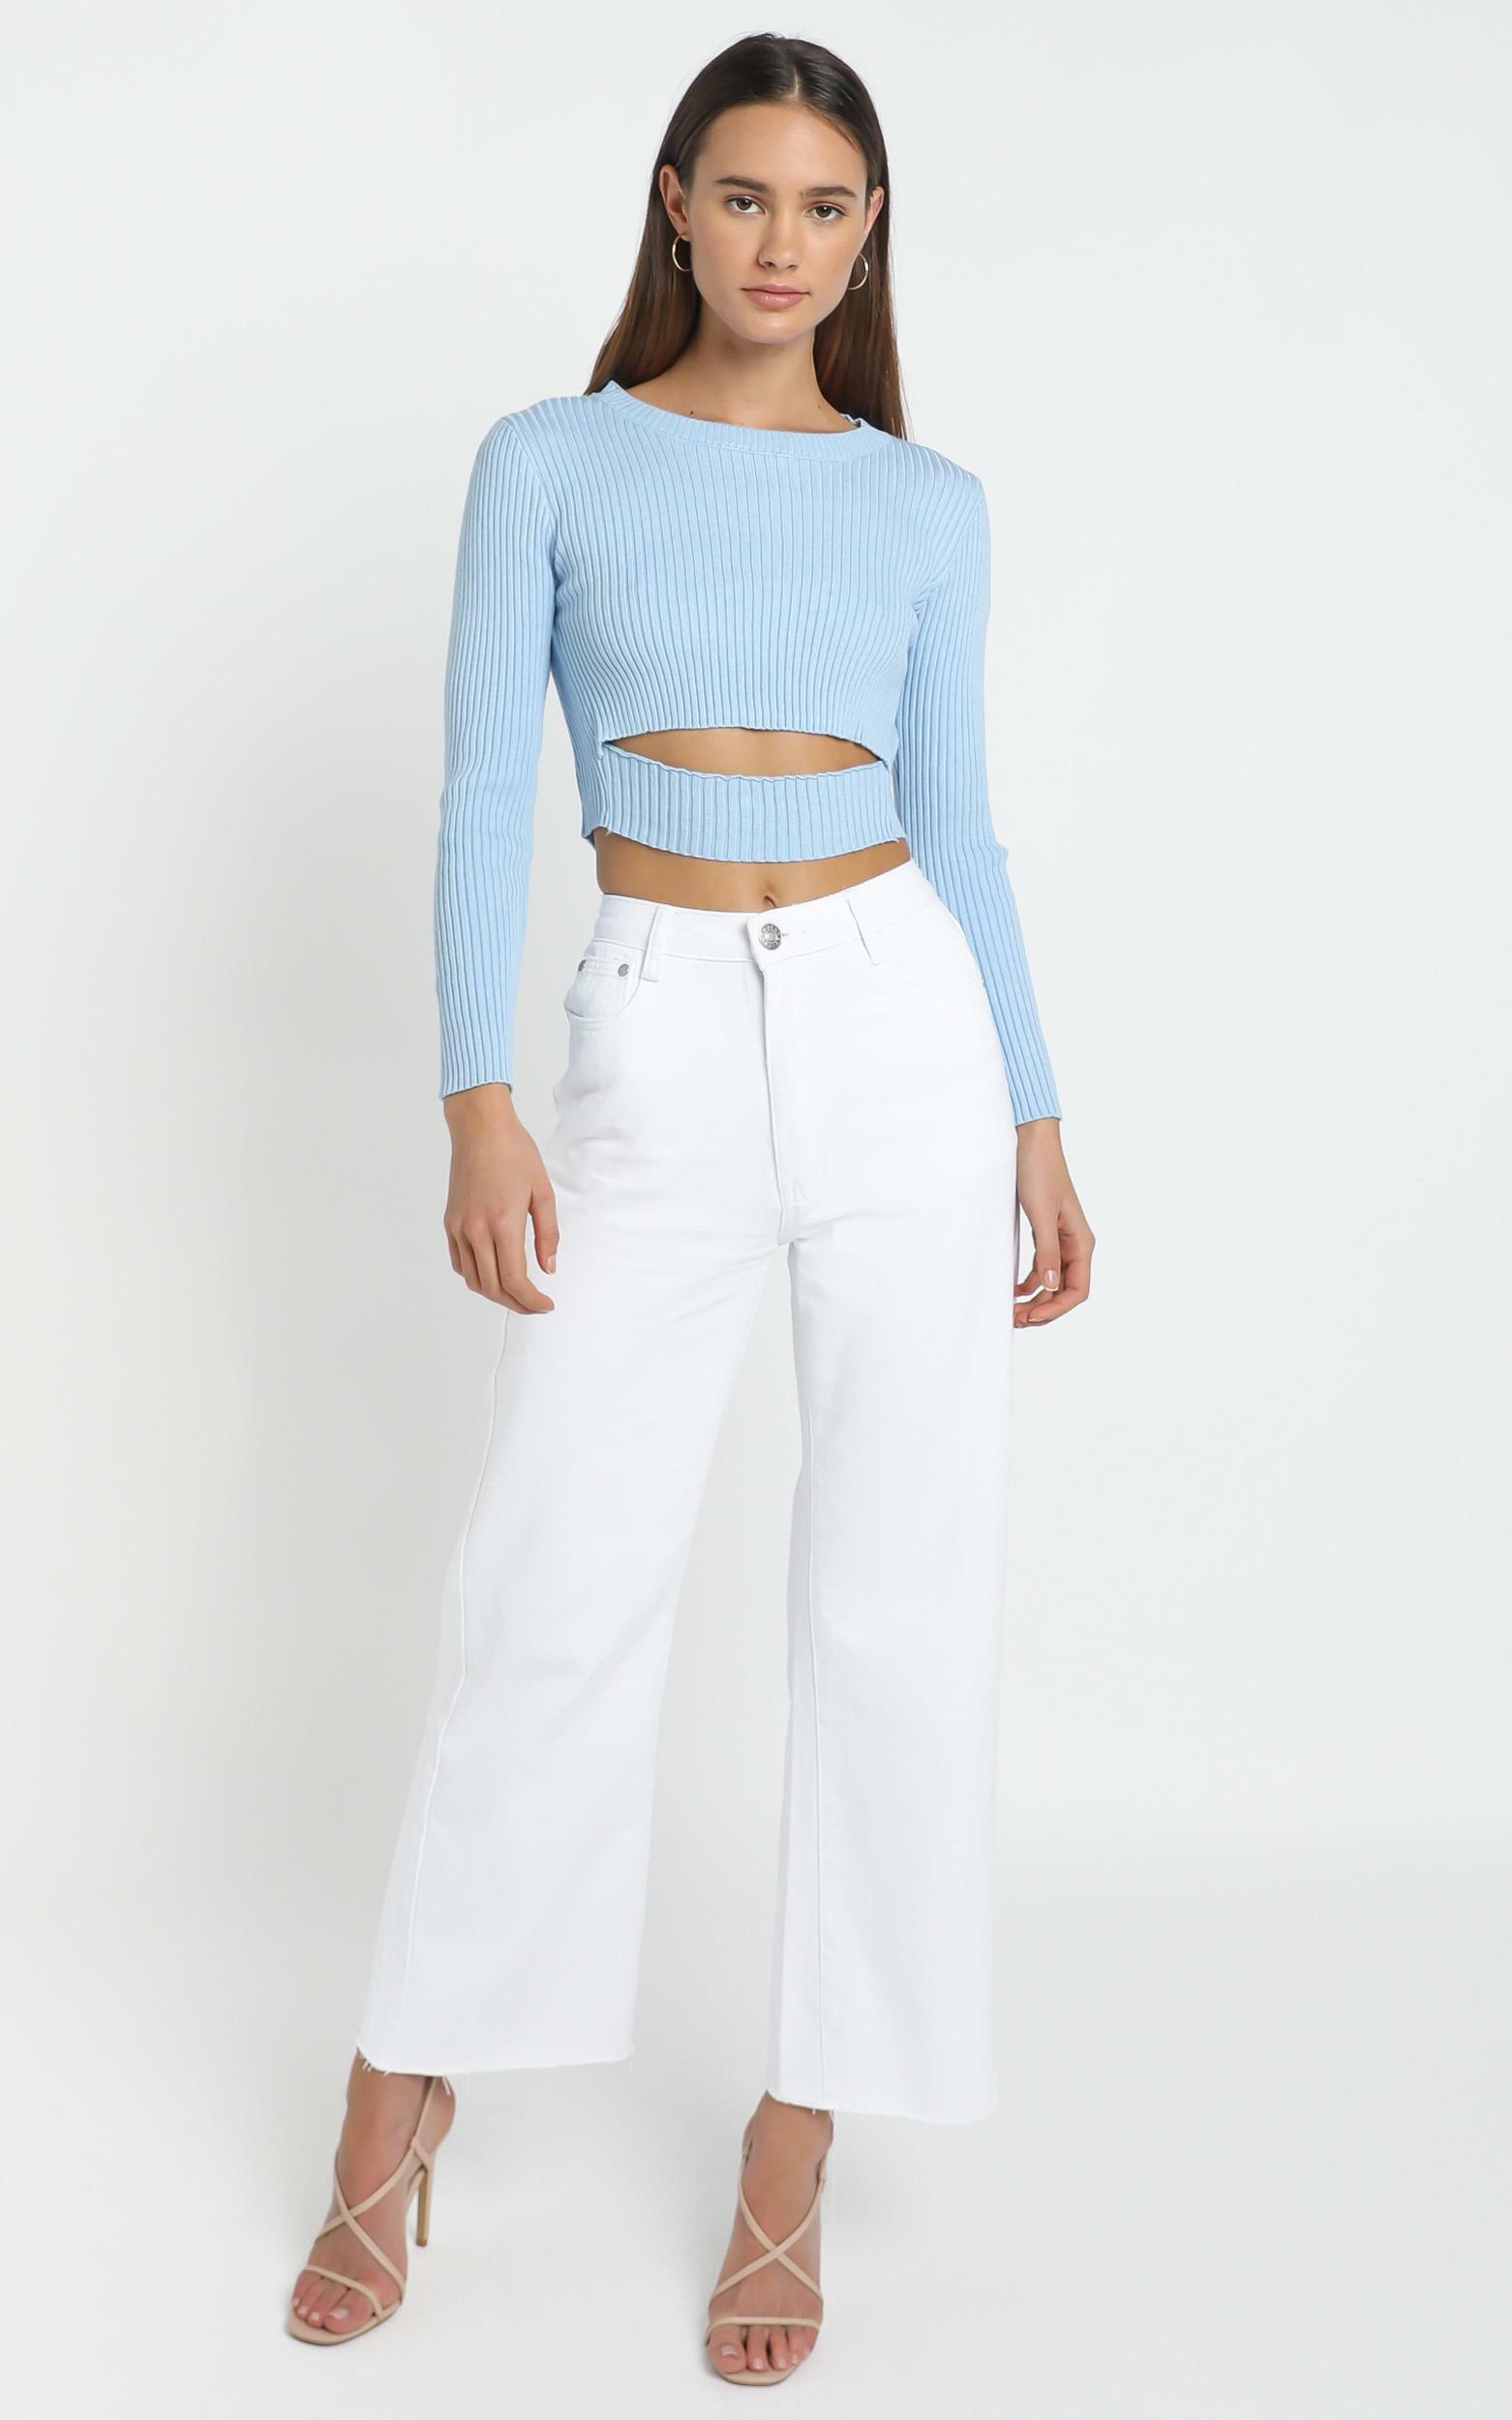 Pernille Top in Baby Blue - L, BLU1, hi-res image number null